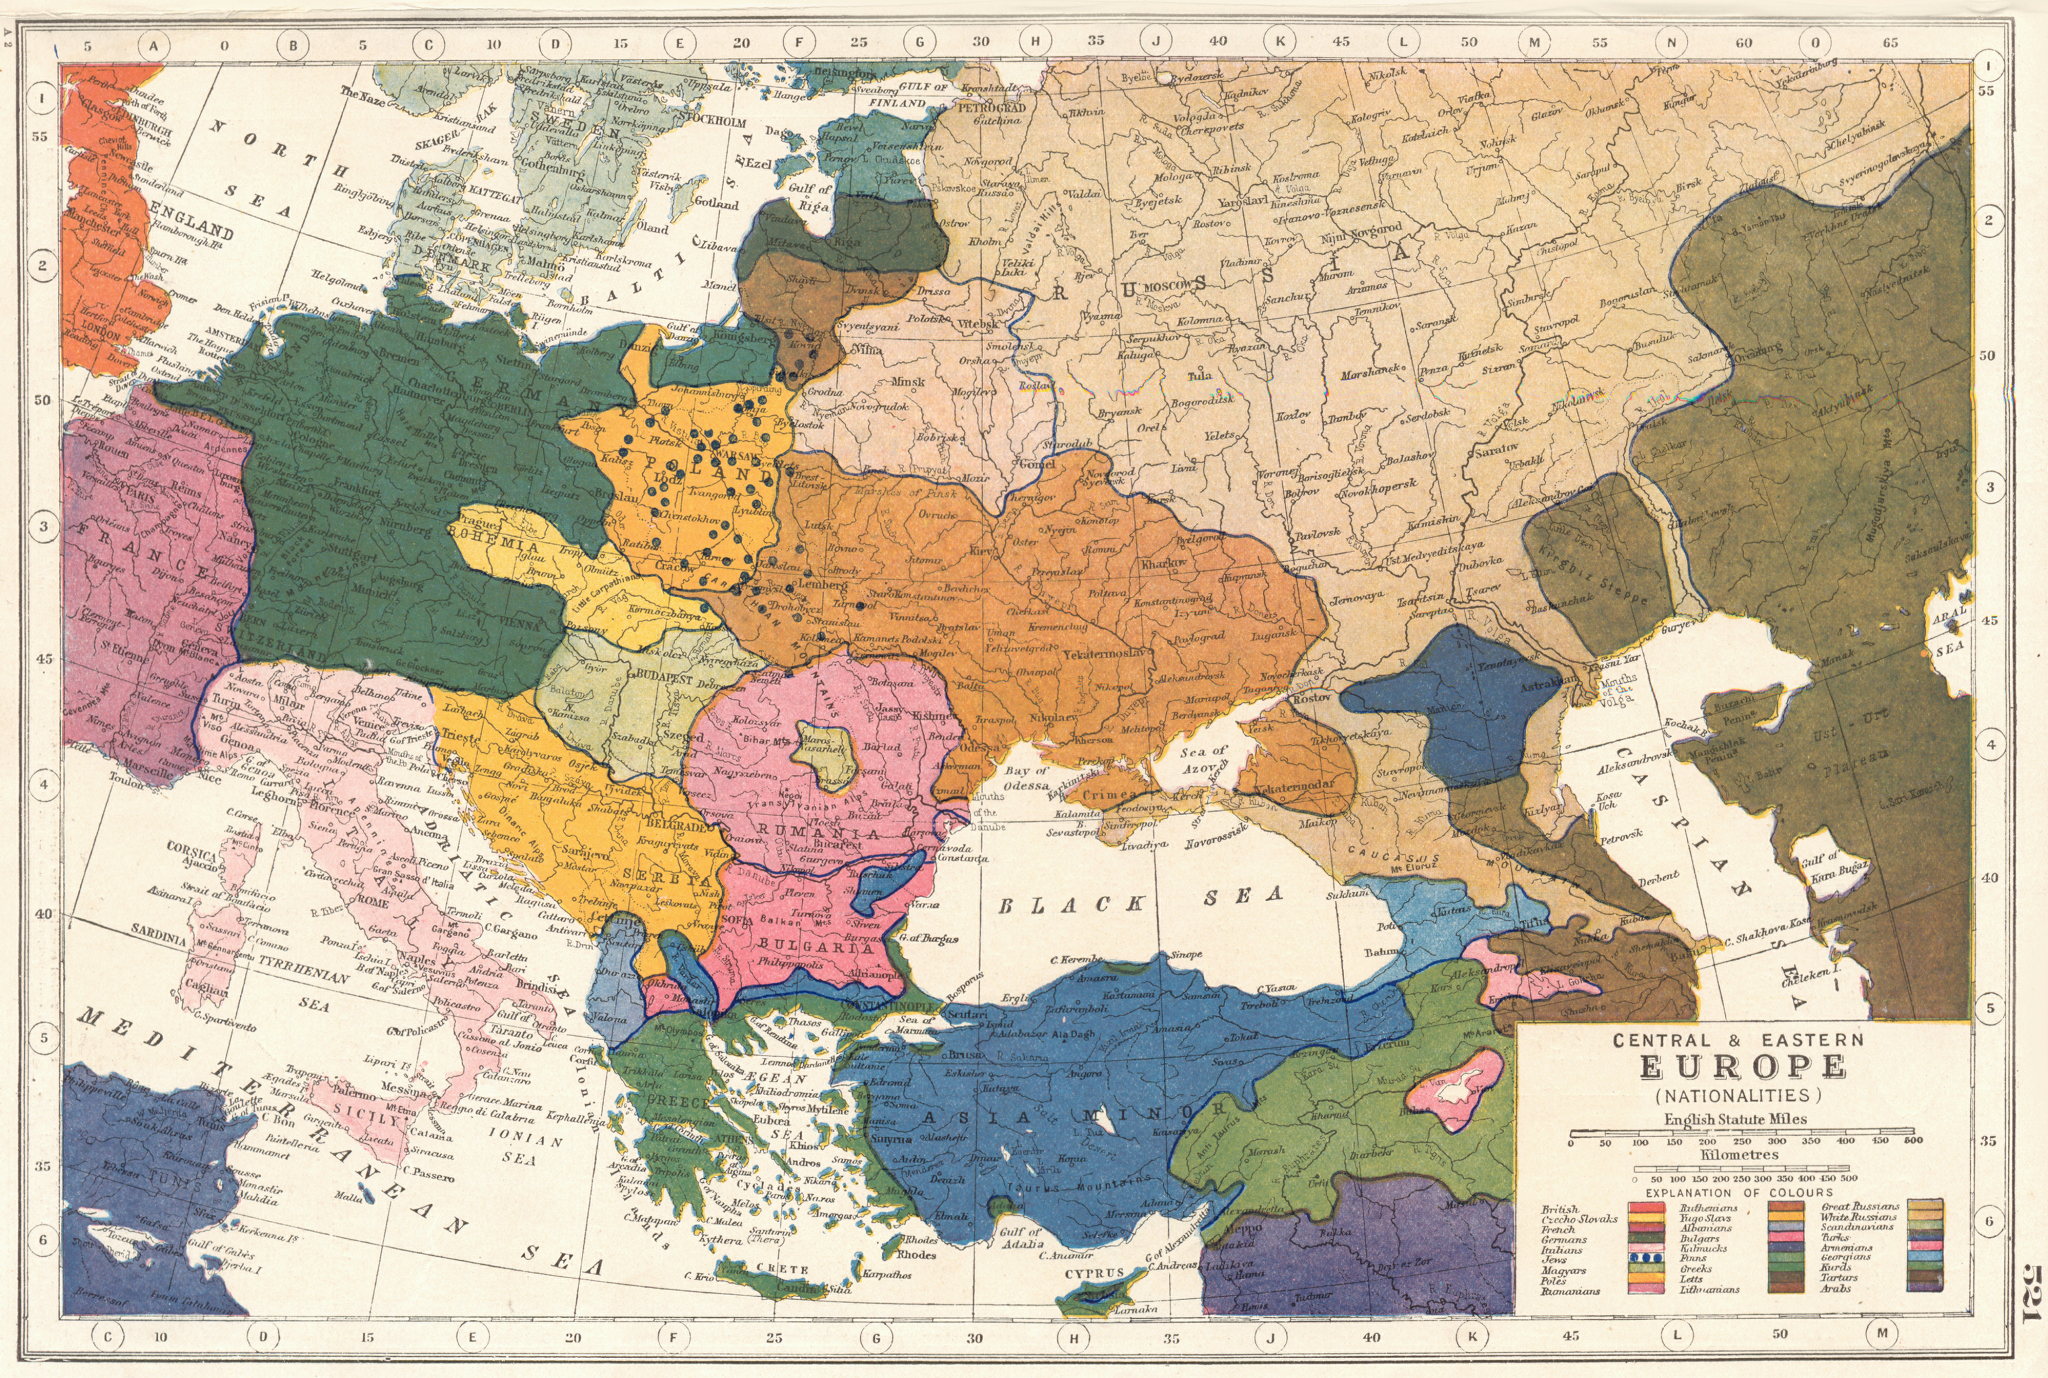 Associate Product EUROPE.Central & Eastern Europe (Nationalities). HARMSWORTH 1920 old map